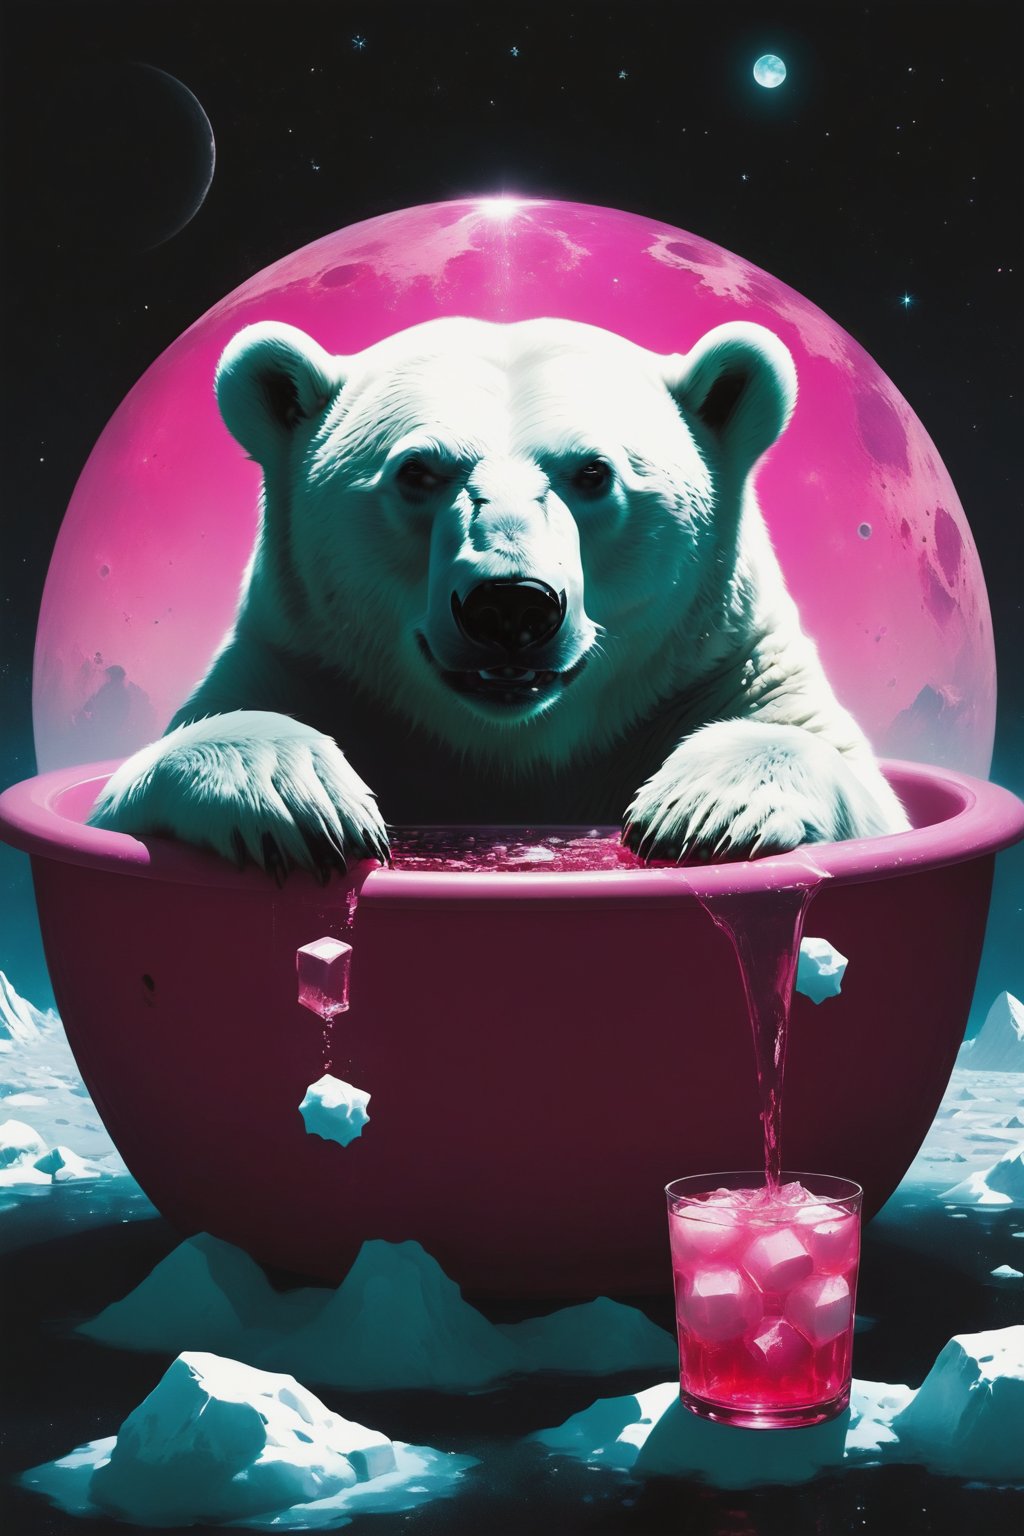 A polar bear Lying in a pink bathtub filled with ice cubes, body covered in ice cubes, holding a drink in hand ,
Take a leisurely bath,on the moon.  Behind the polar bear , there's a galactic pink view of Earth from space, with the planet appearing to be exploding. The vastness of space is filled with stars, explosion fragments, and the moon's surface is dotted with rocks and craters., photo